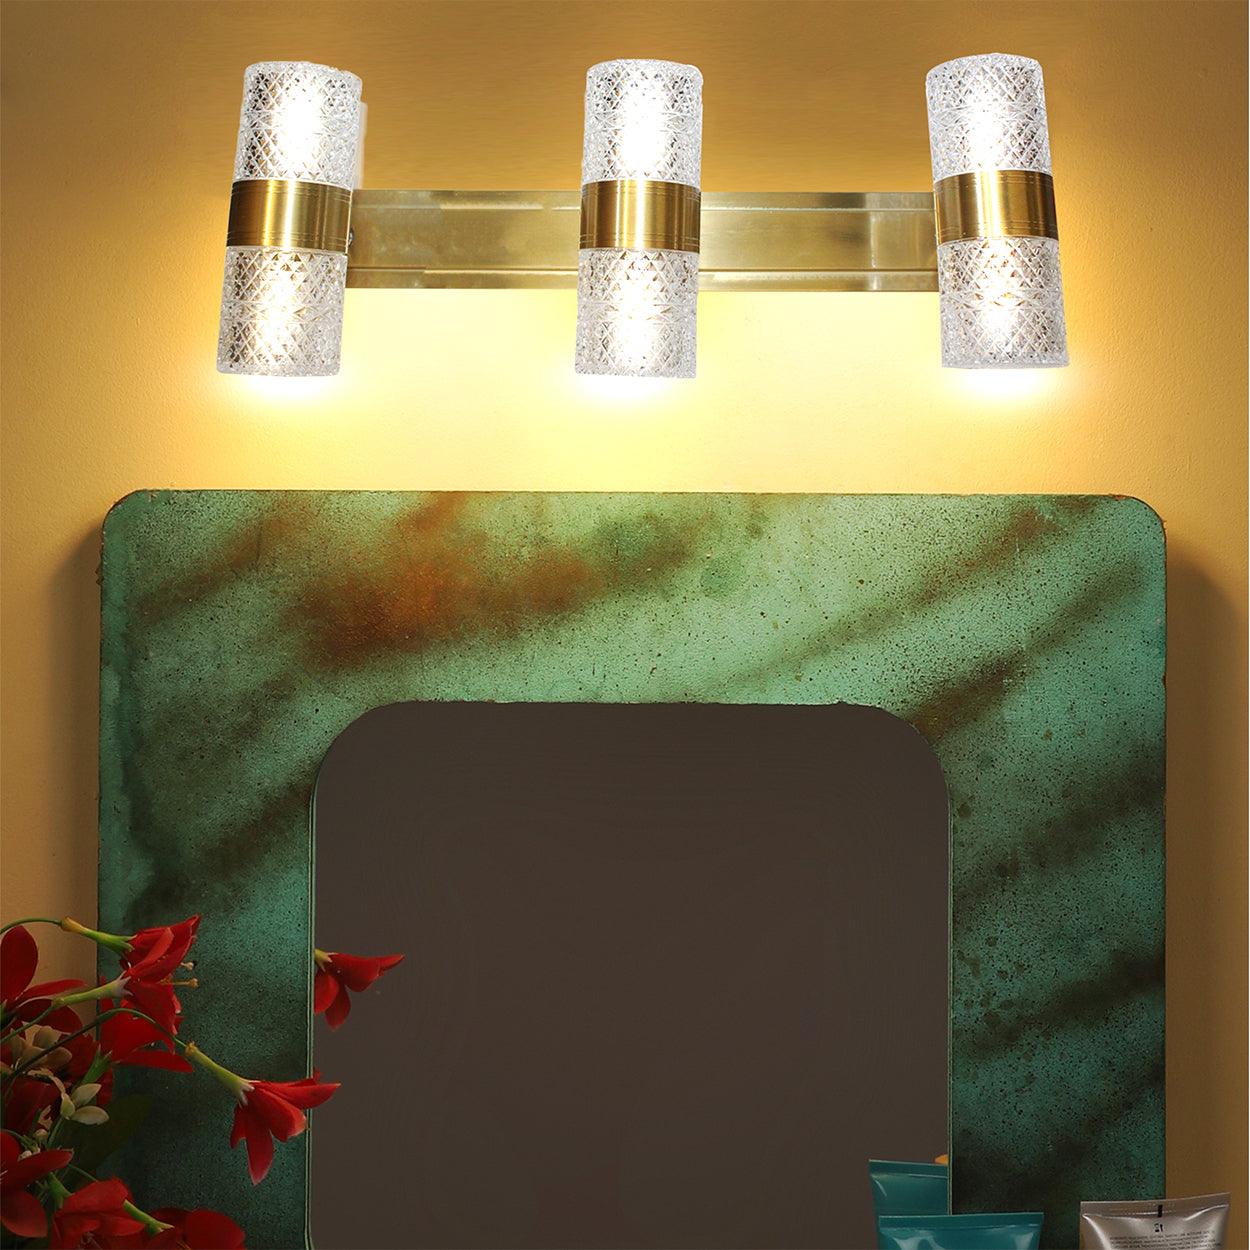 ANKUR CUT GLASS CYLINDER ADJUSTABLE MIRROR LED PICTURE WALL LIGHTS - Ankur Lighting